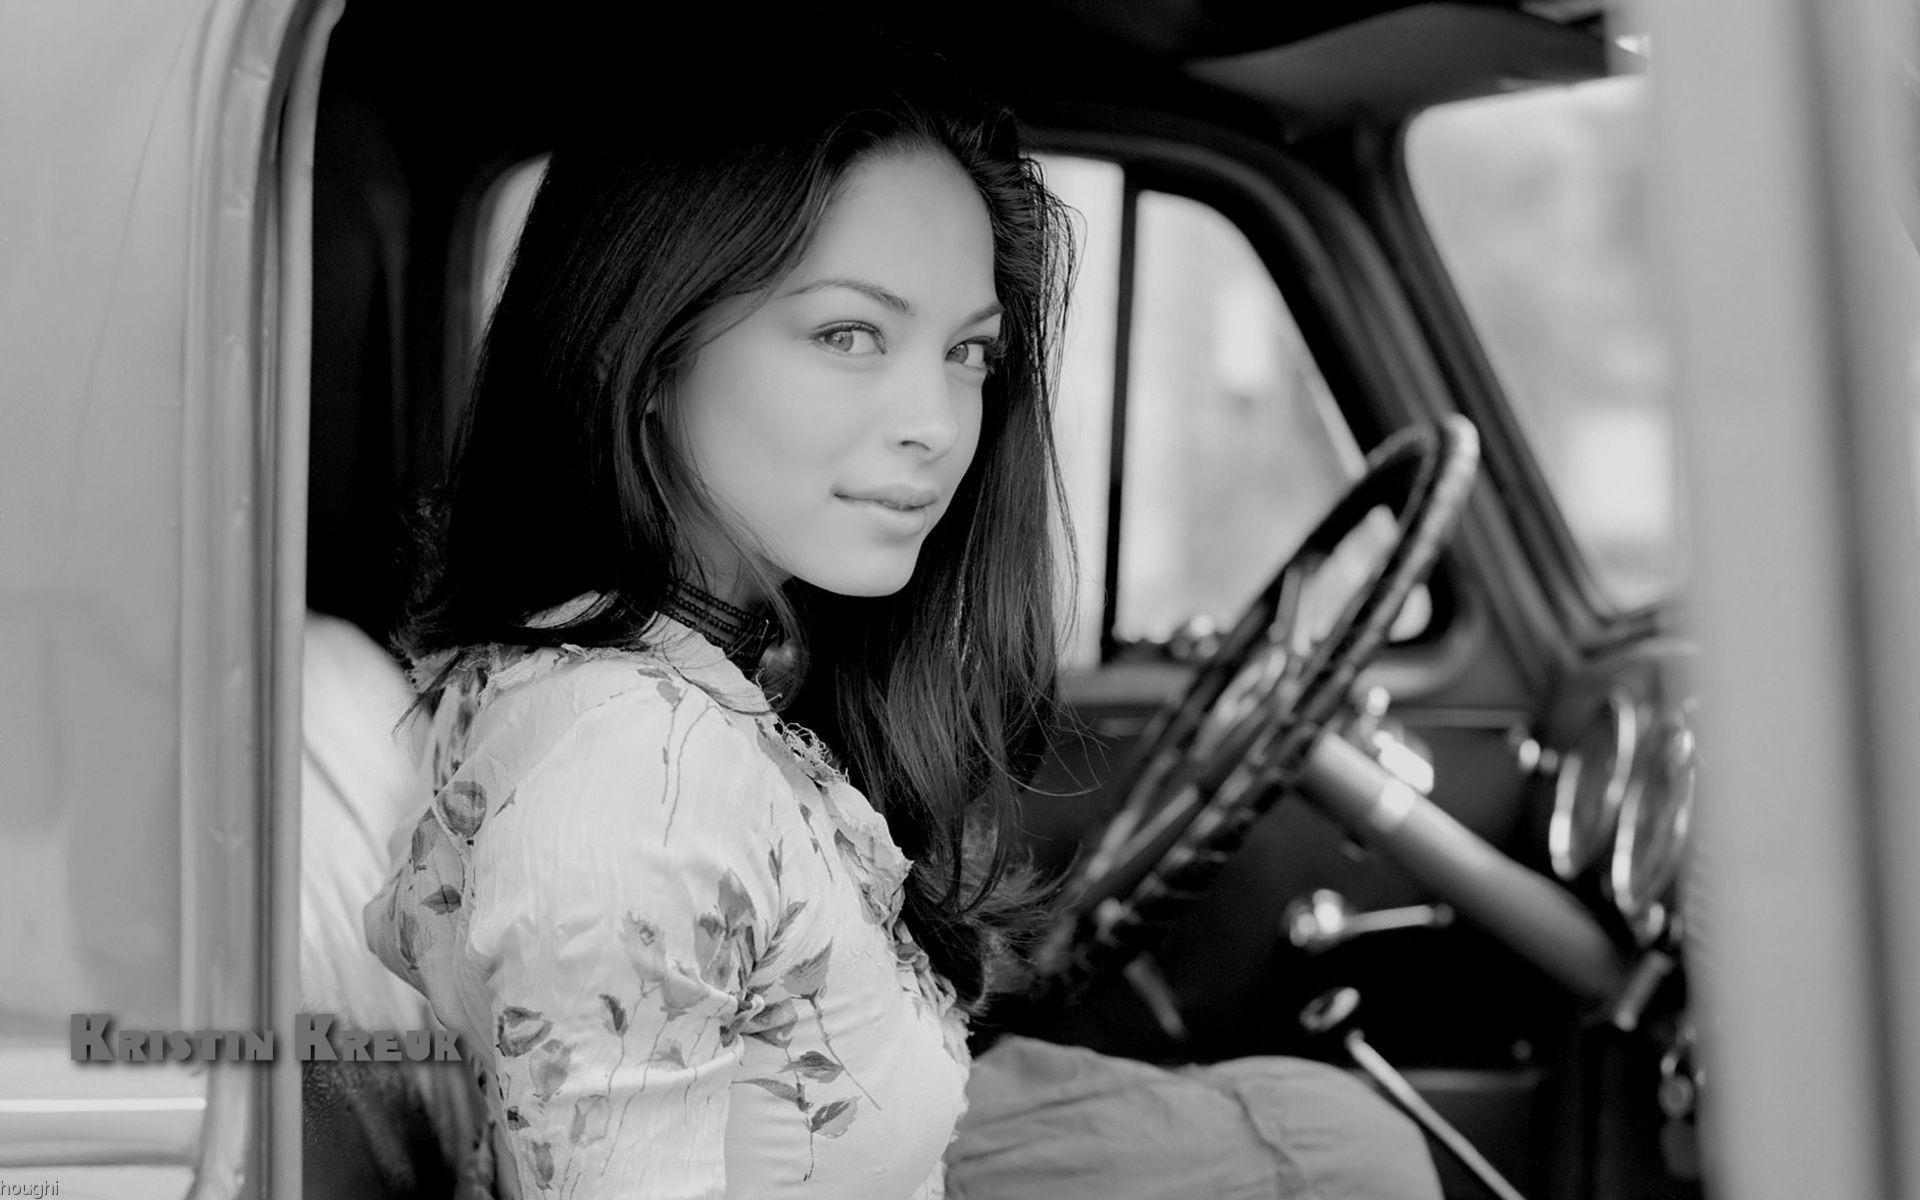 Kristin Kreuk #010 - 1920x1200 Wallpapers Pictures Photos Images